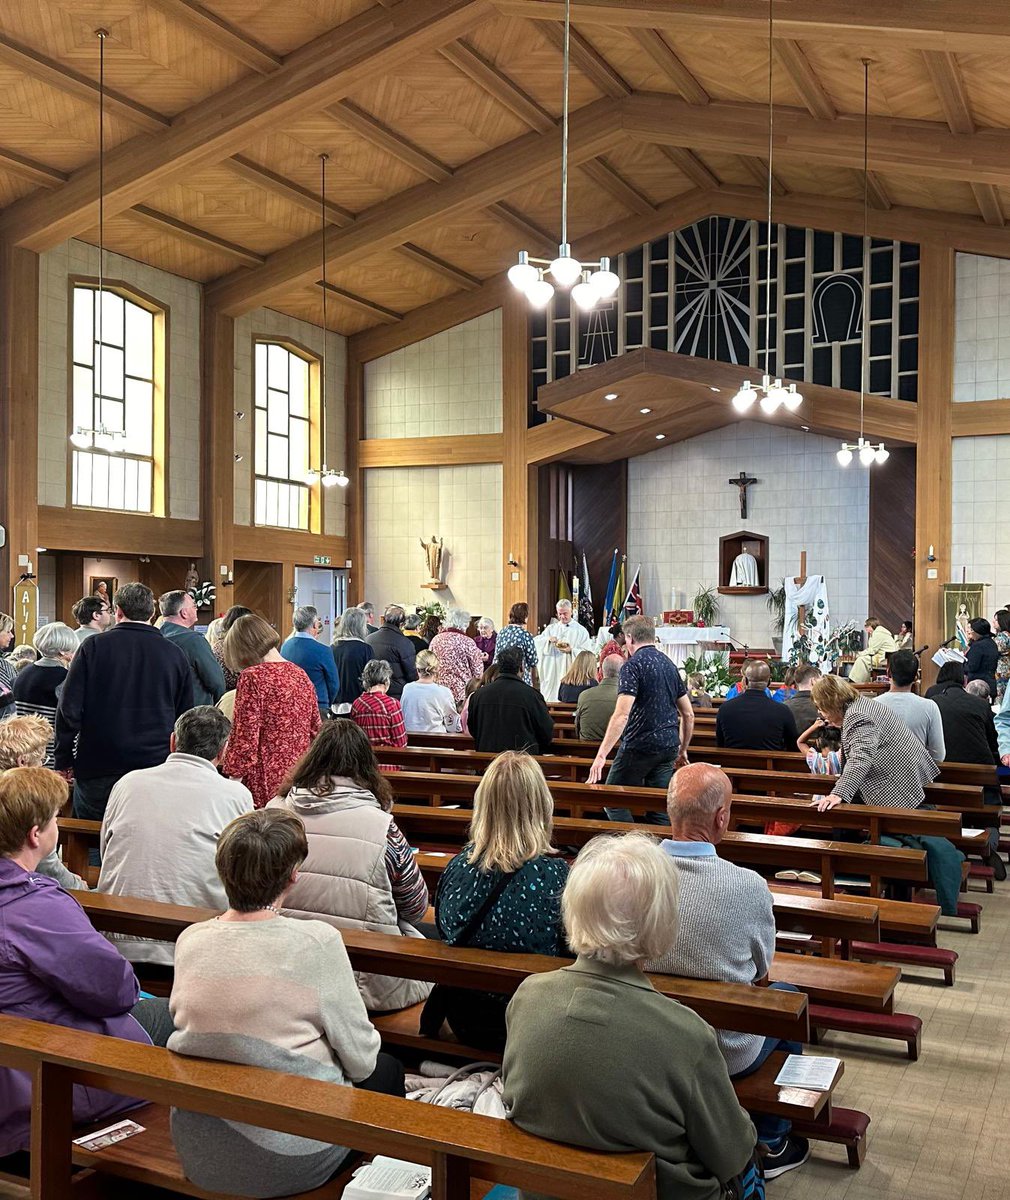 It was a great pleasure joining Fr David and the parishioners of St James the Great, Petts Wood for our ACN Appeal over the weekend. Thank you for your kindness and generosity. @RC_Southwark @acn_uk